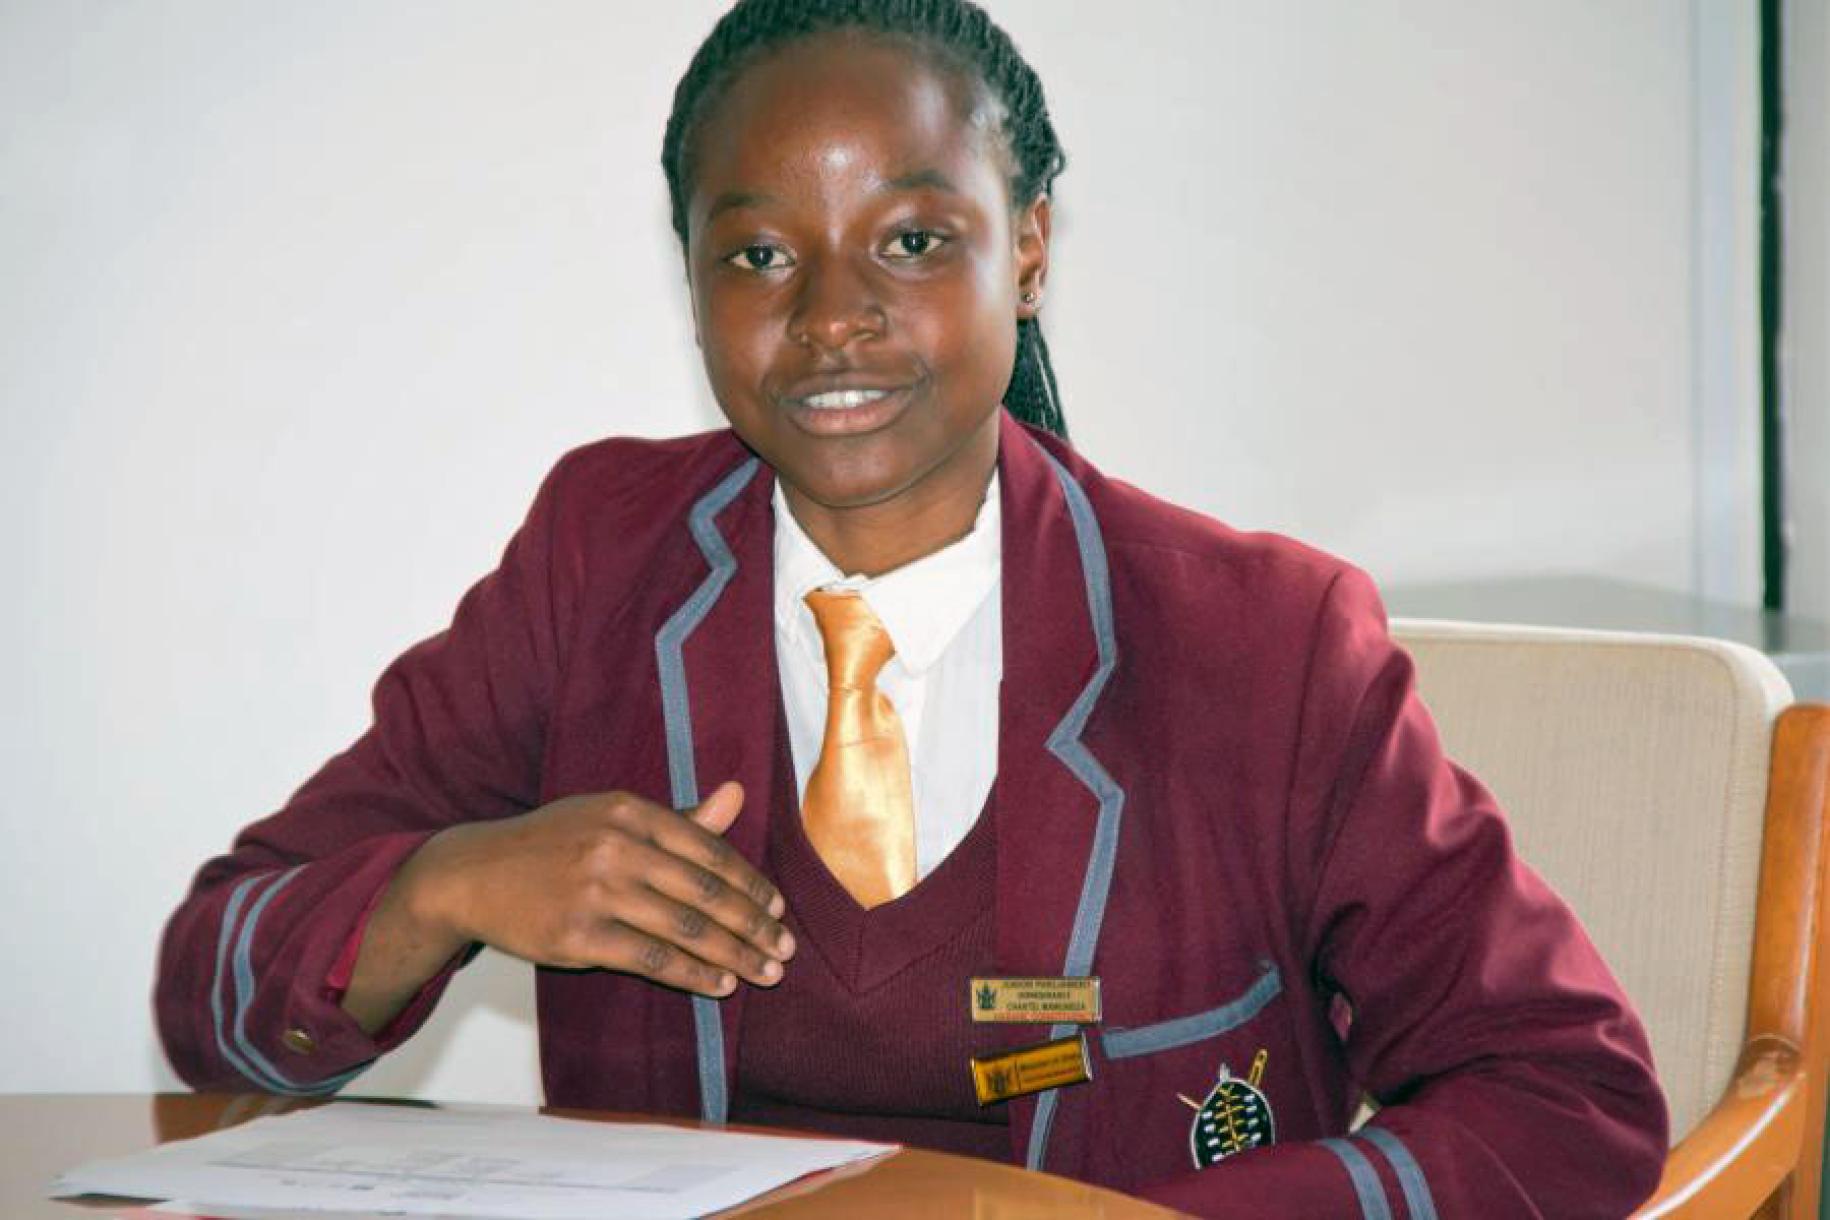 A young Zimbabwean school girl wearing her school uniform sits at a desk as she speaks.